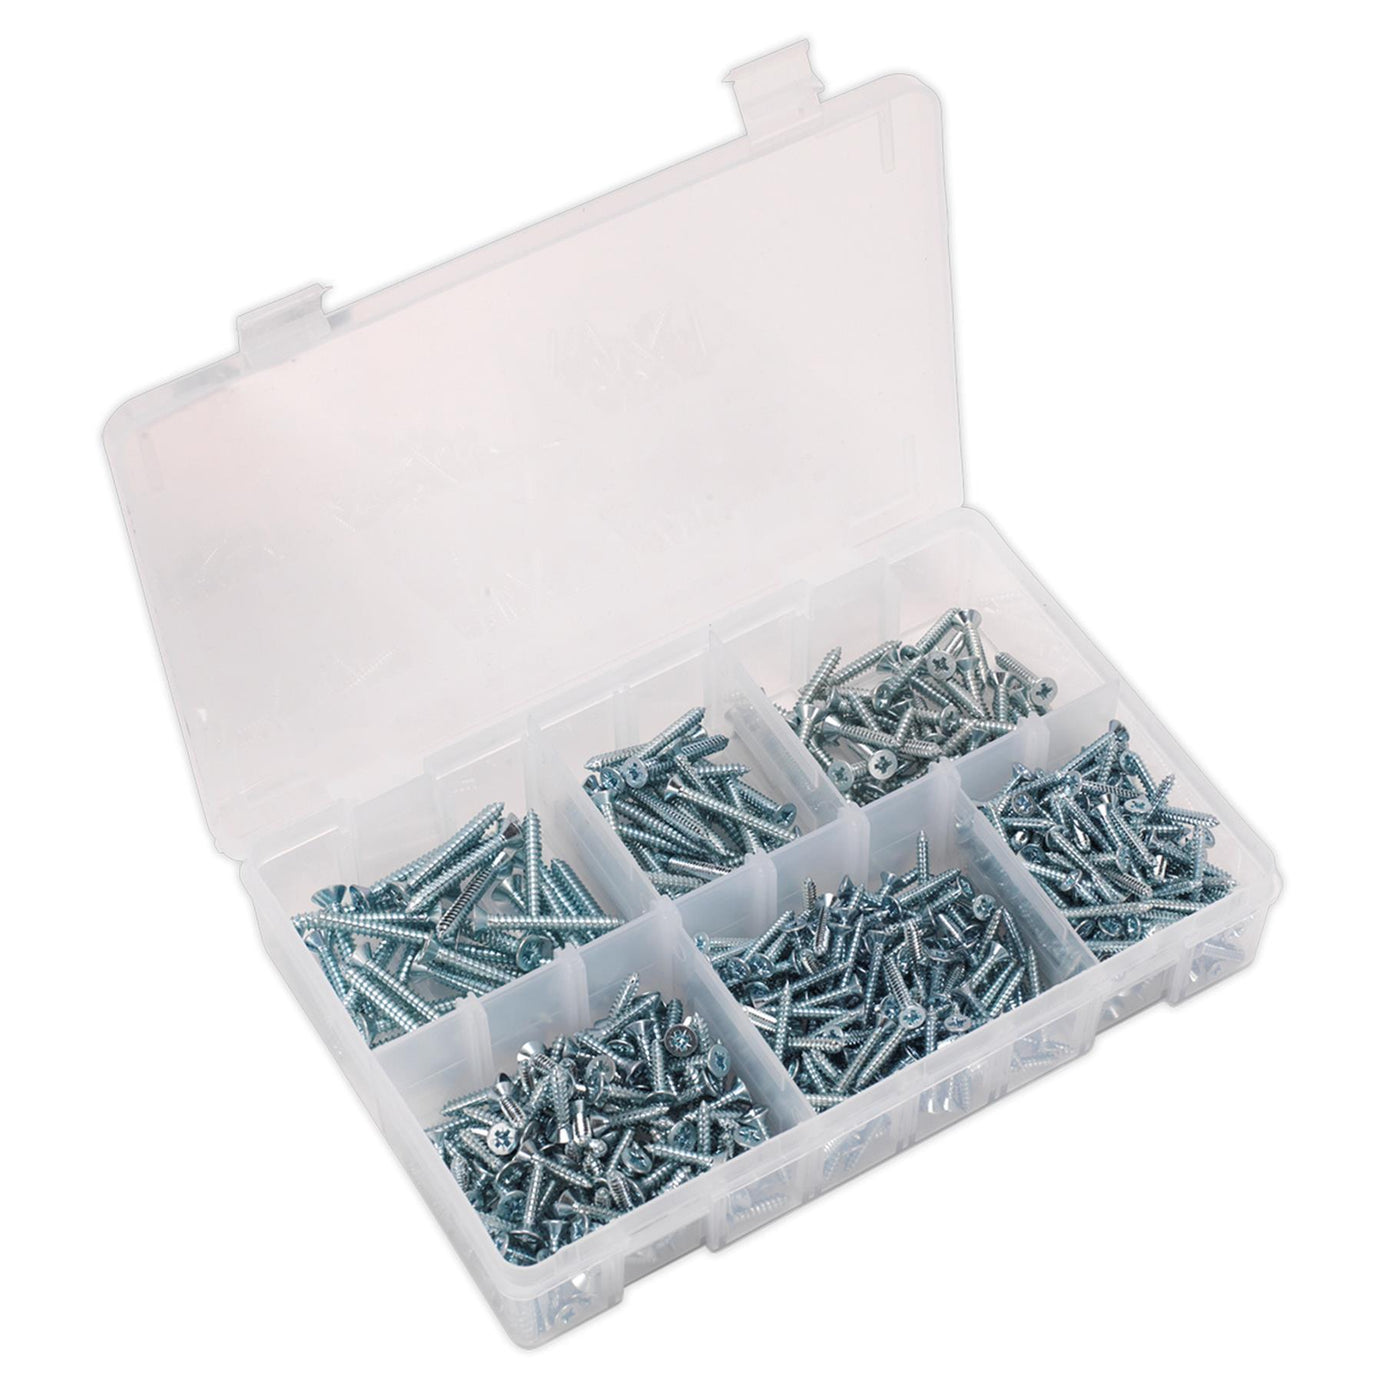 Sealey 510 X Assorted Box Of Self Tapping Screw Assortment Countersunk Pozi